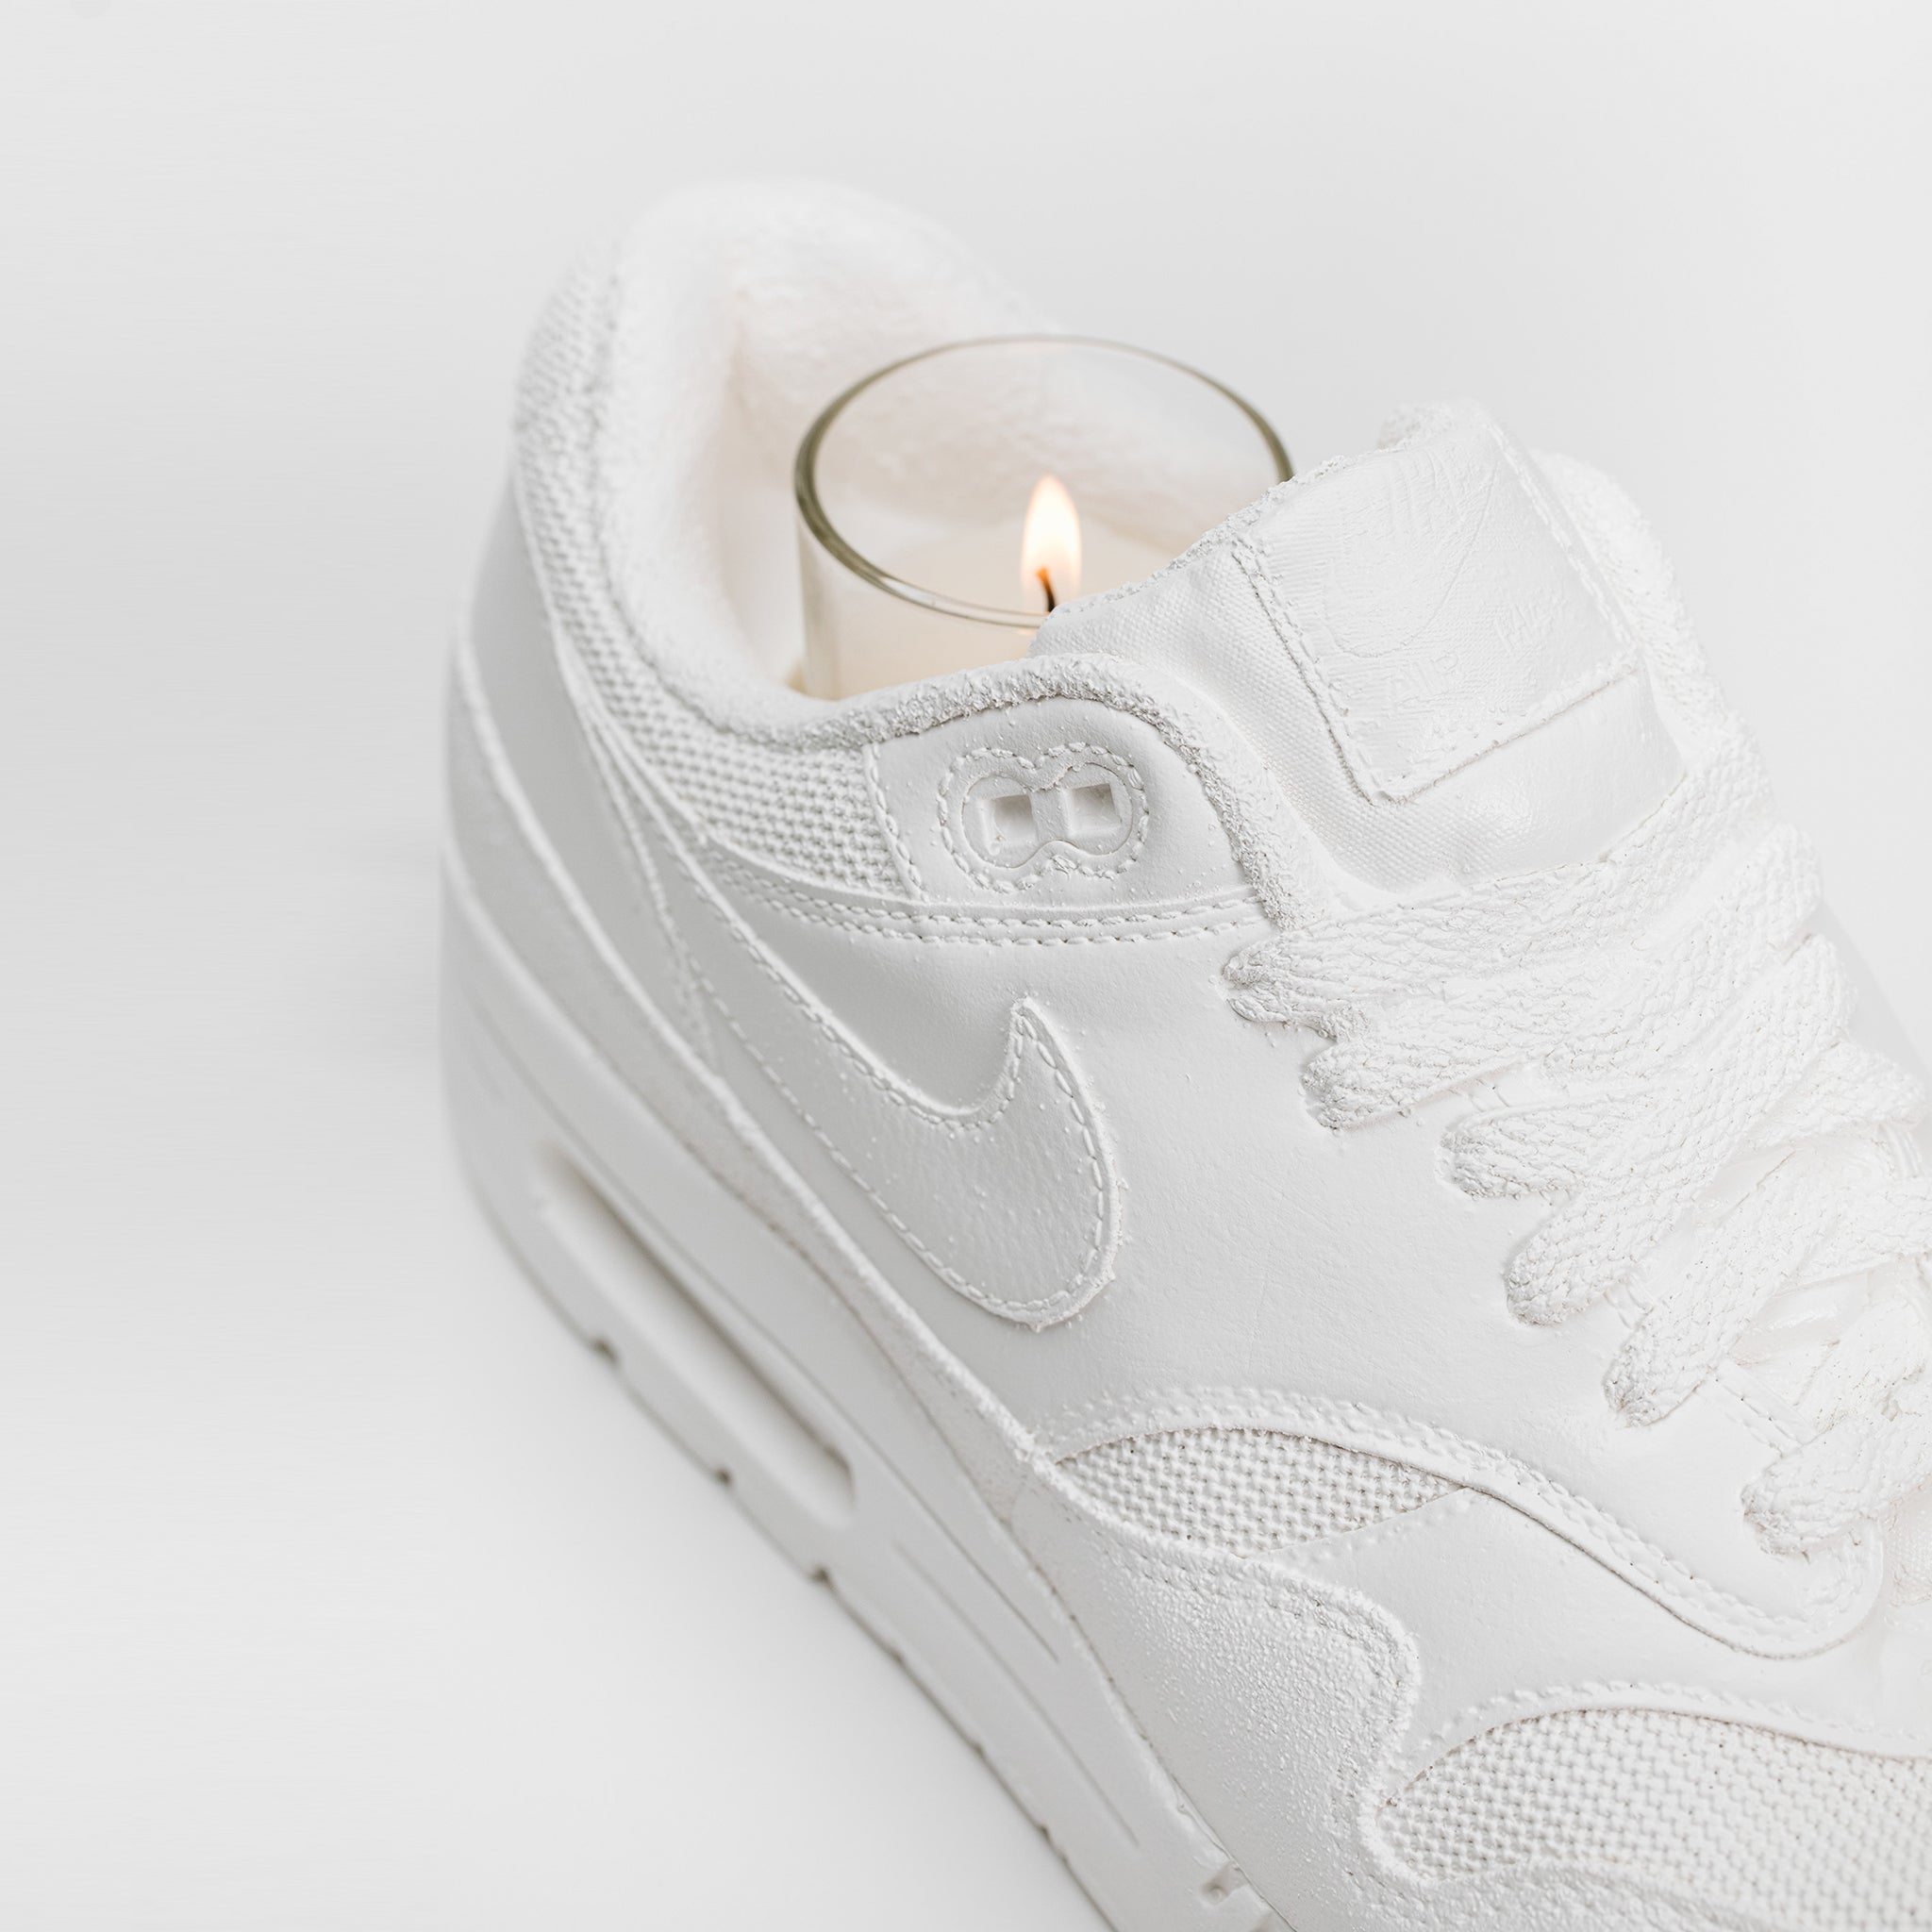 Nike Air Max concrete candle holder with votive candle